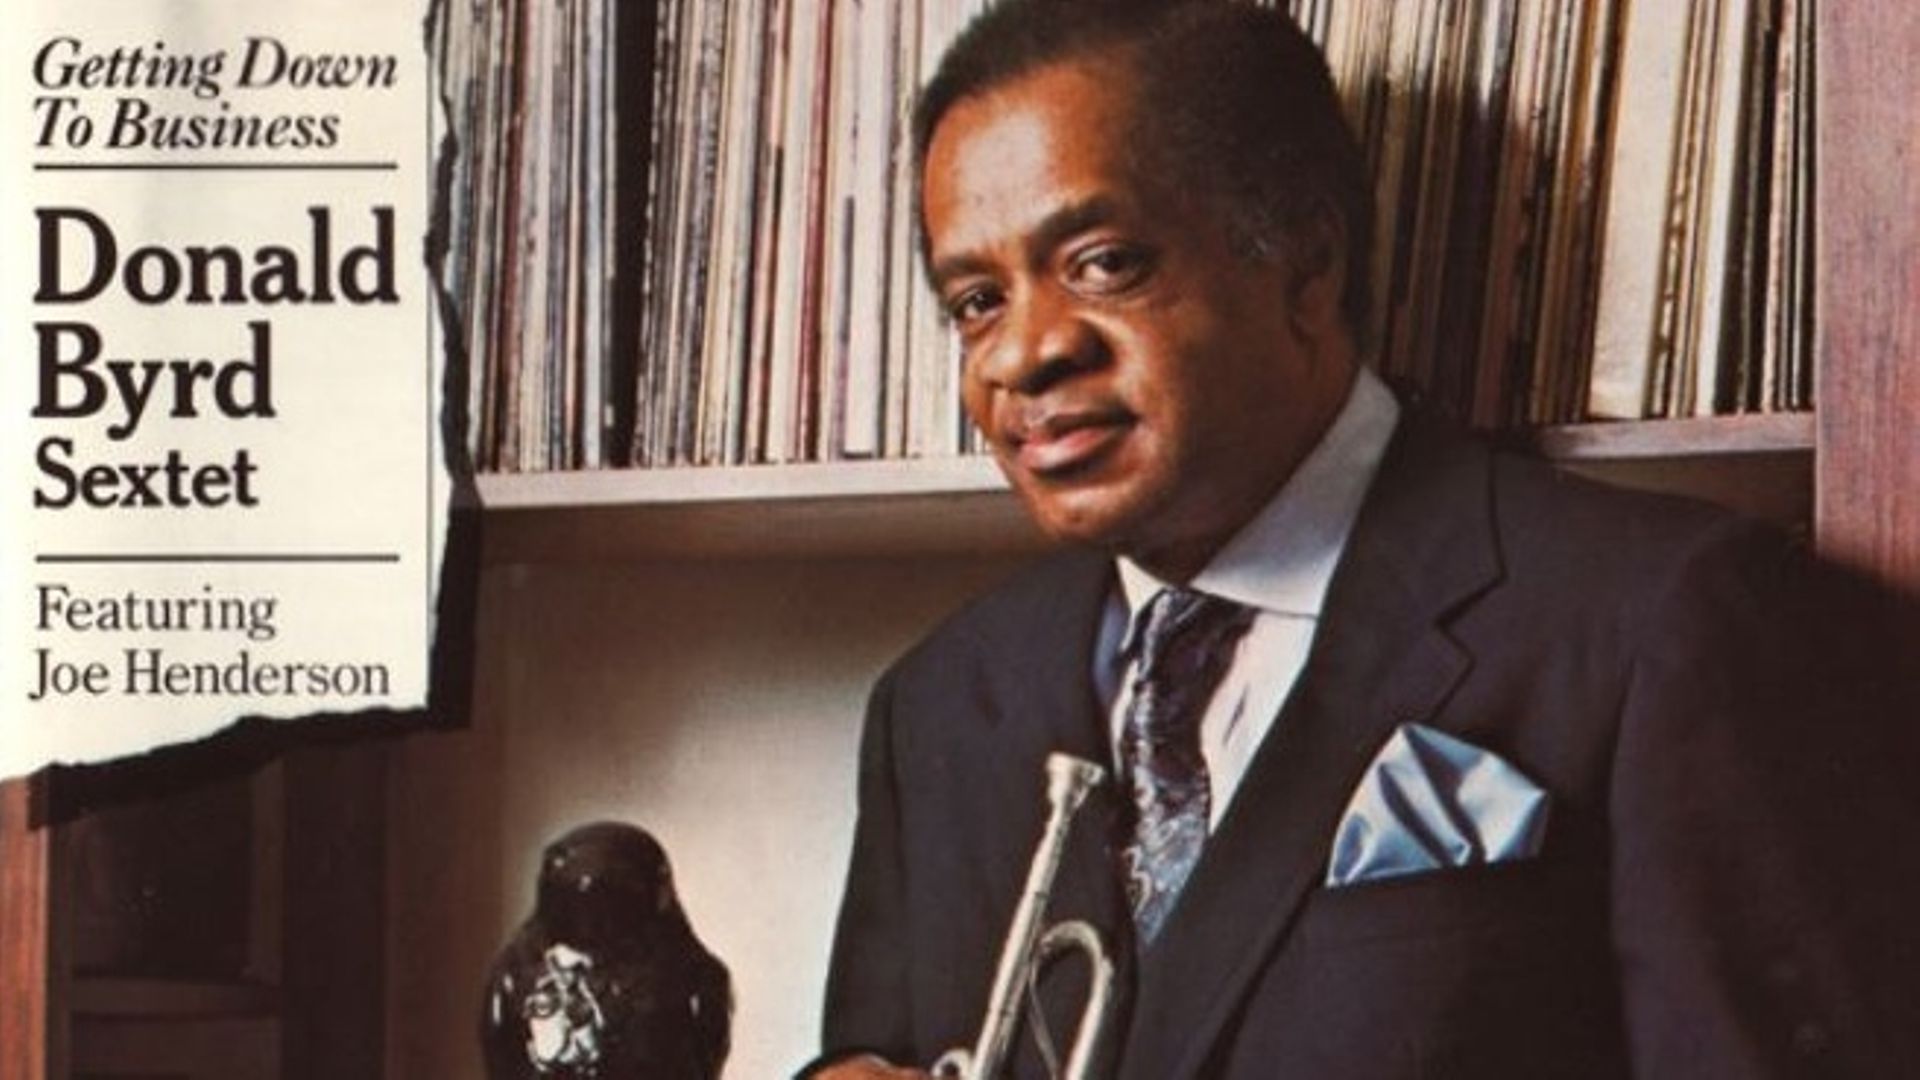 Il y a 30 ans sortait "Getting Down To Business" du trompettiste Donald Byrd